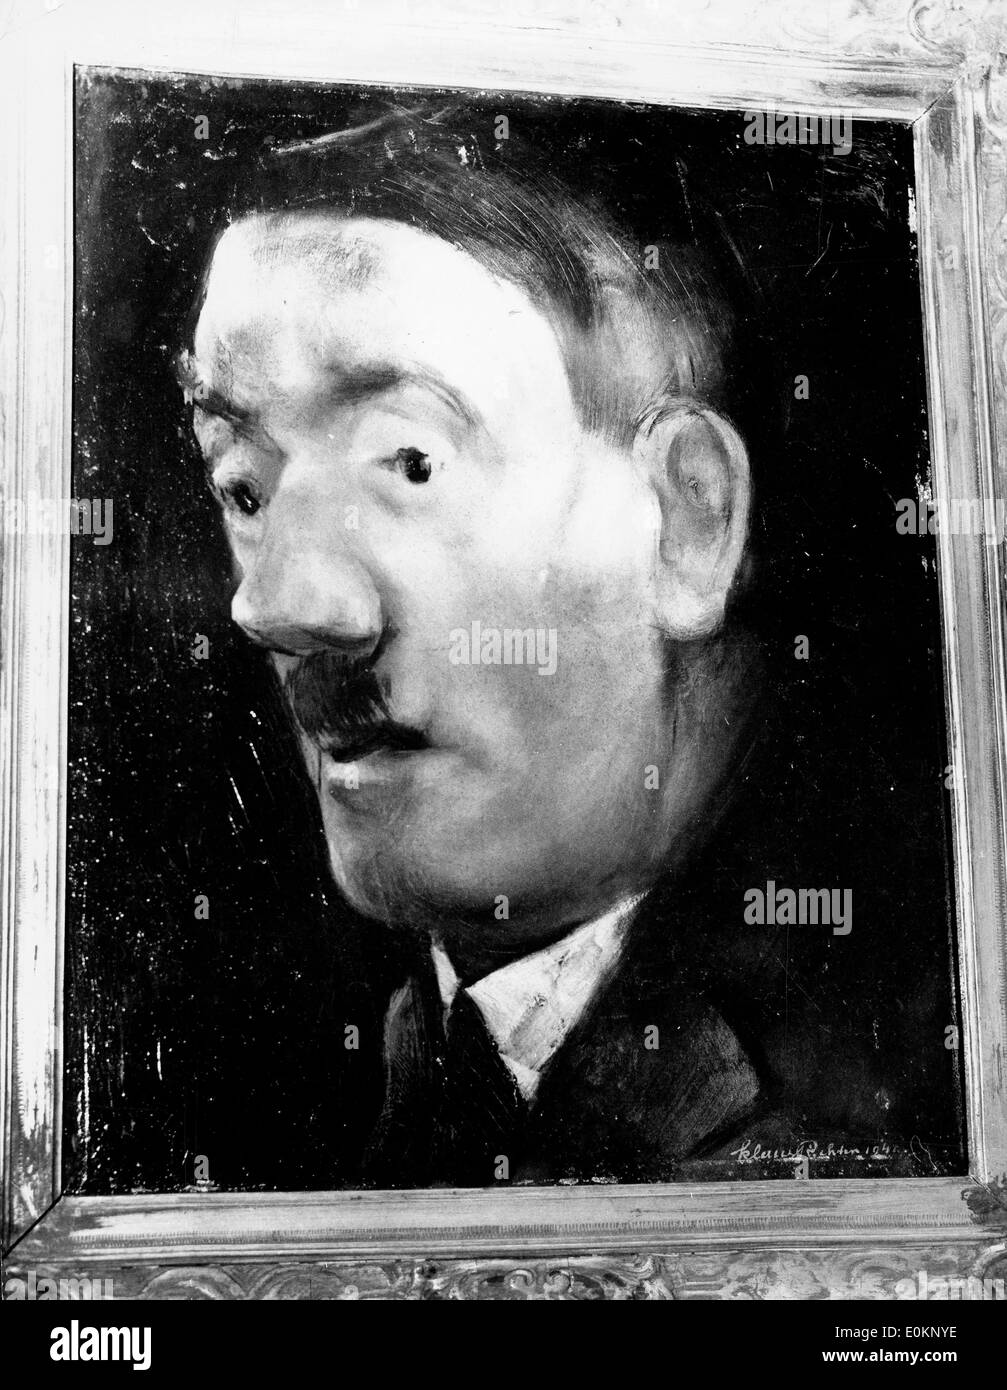 Oil painting of Adolf Hitler Stock Photo